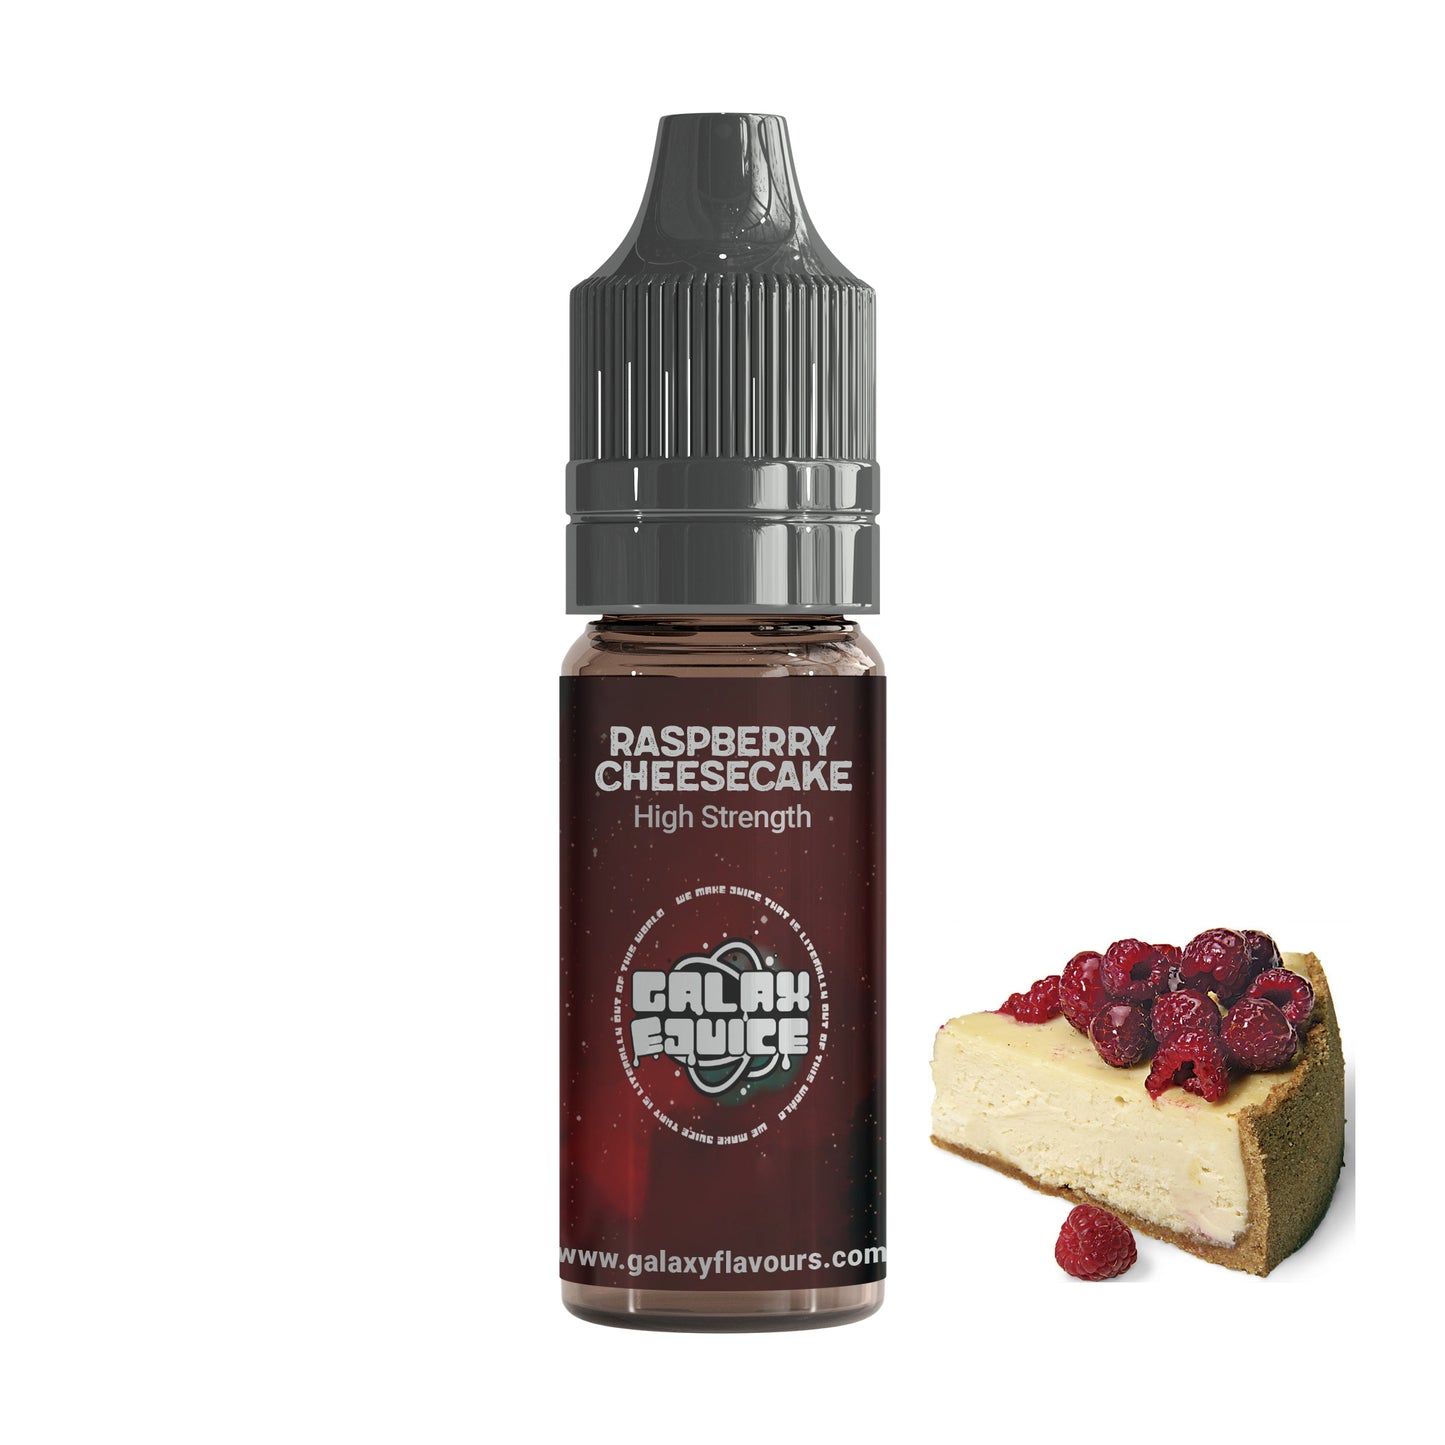 Raspberry Cheesecake High Strength Professional Flavouring.